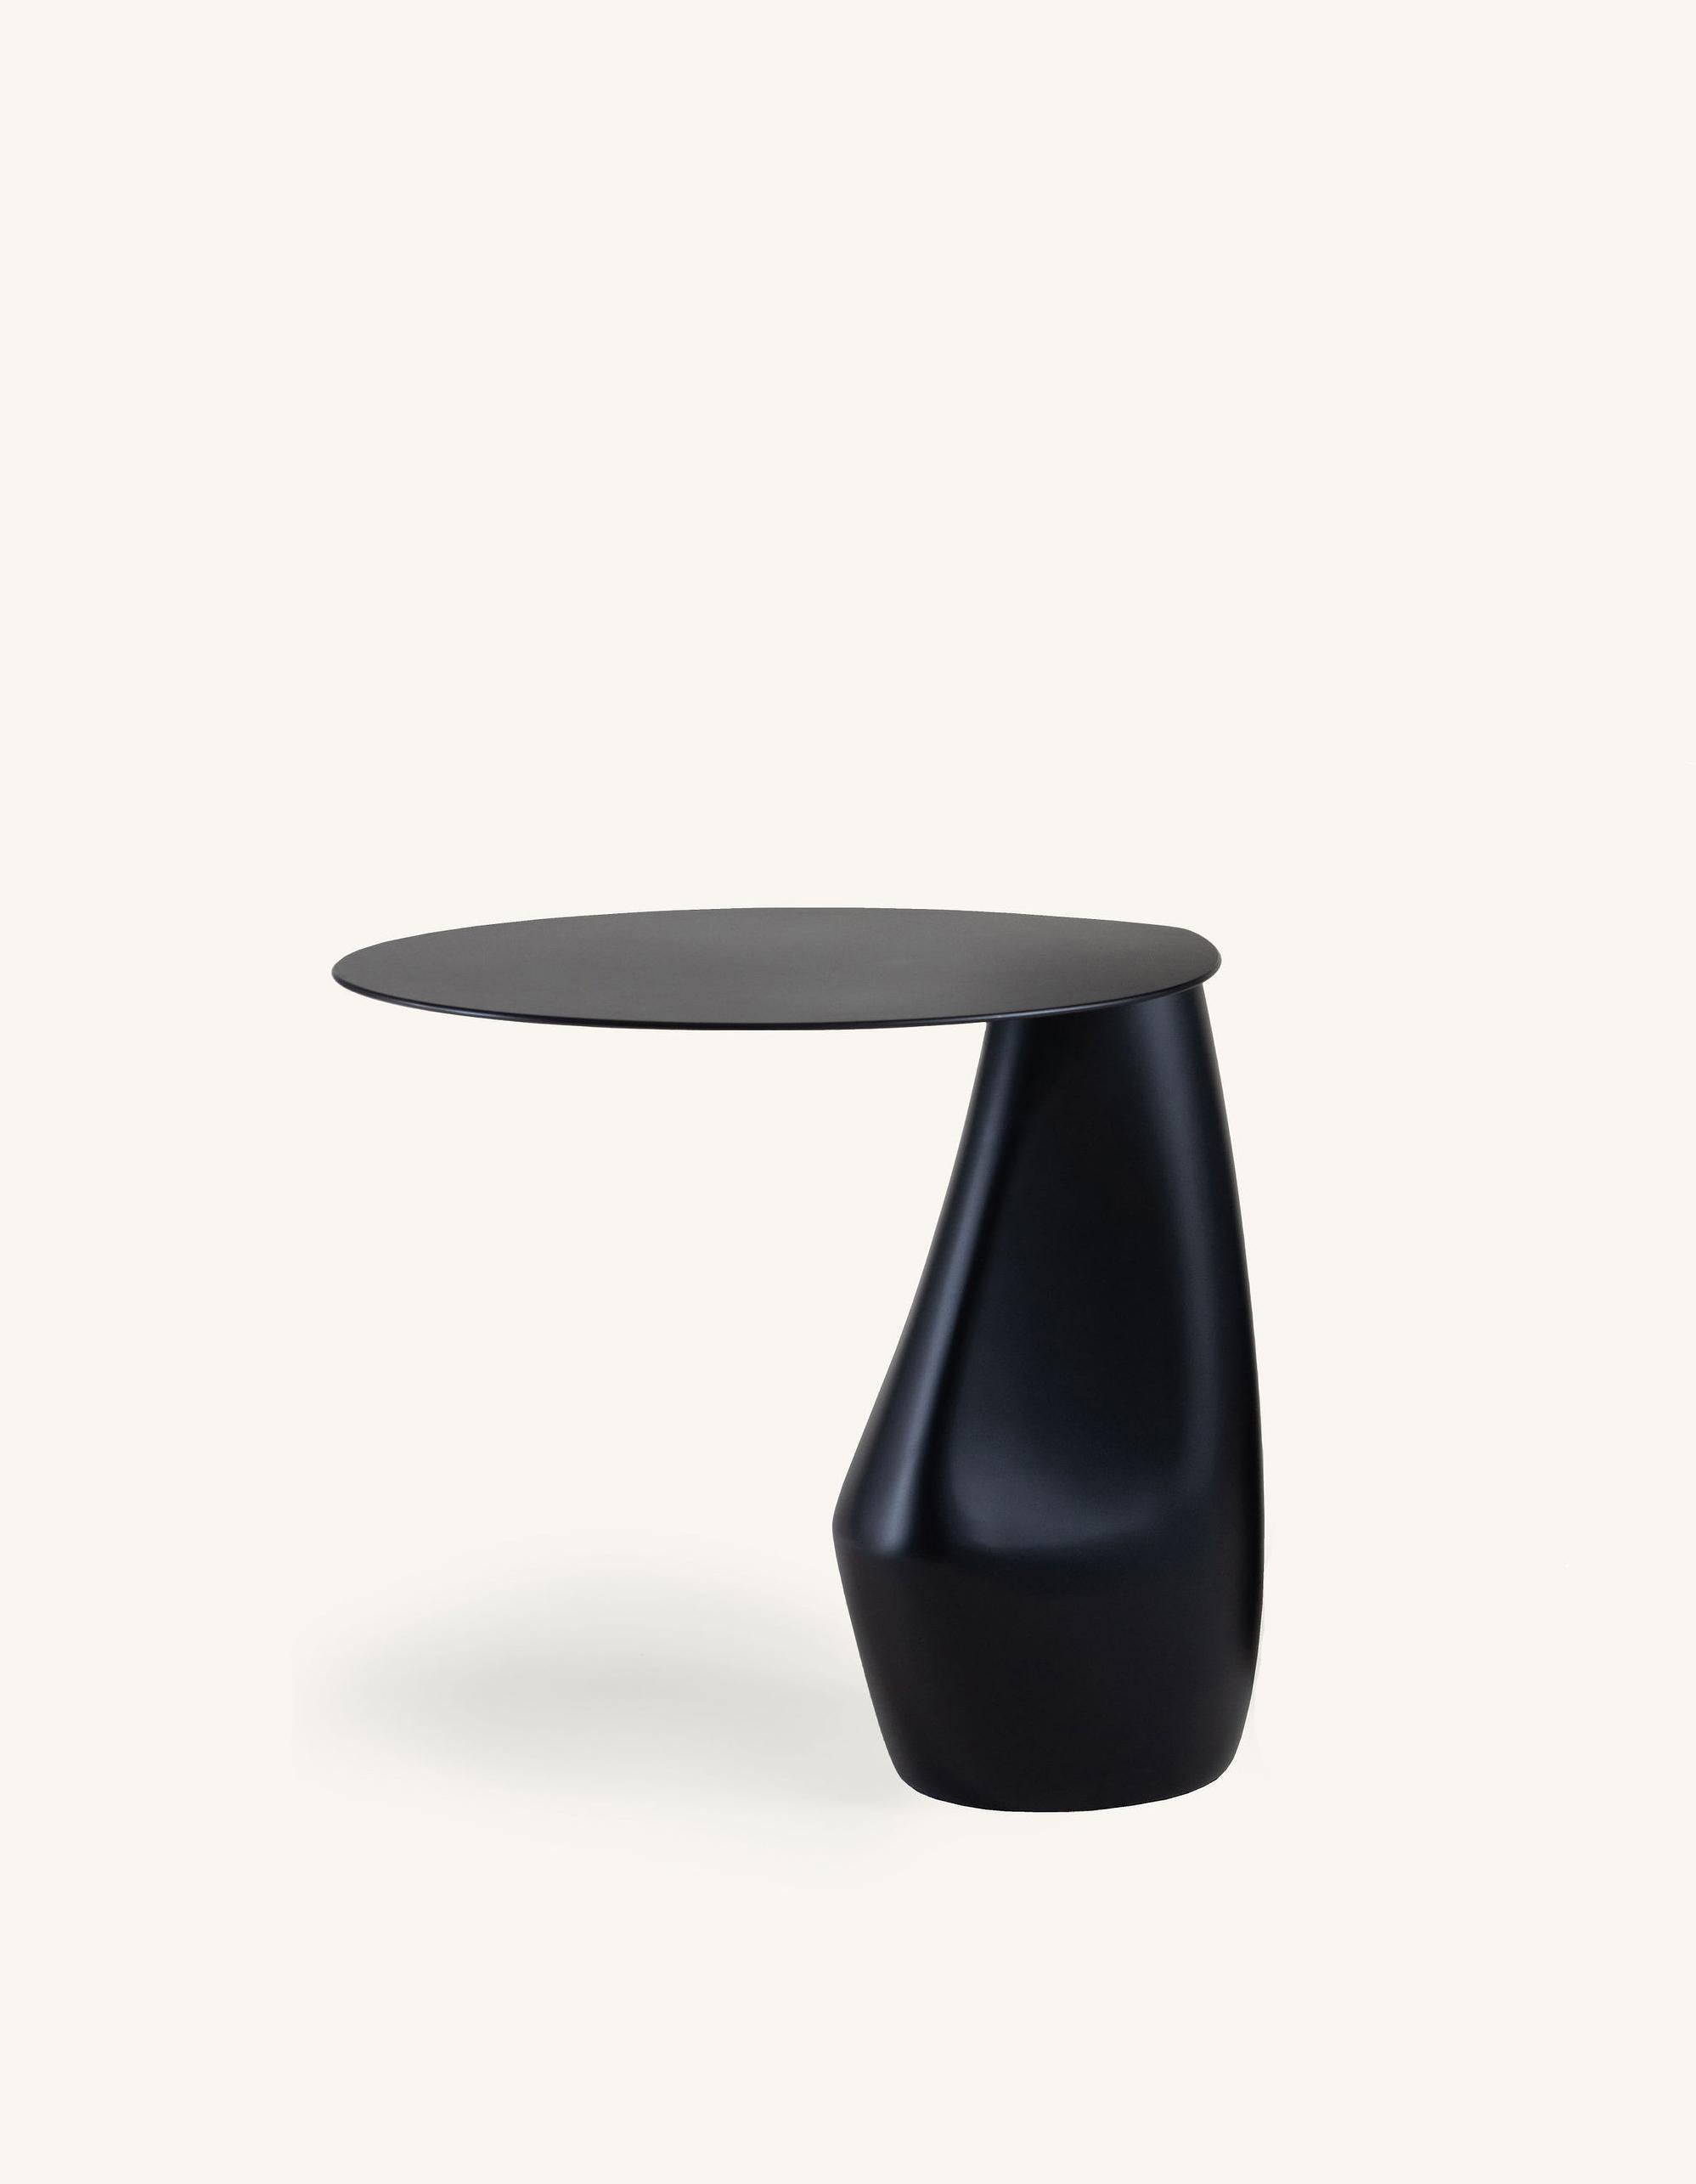 A signature piece from our stone collection, the expertly hand-sculpted Dionis side table evokes the subtle curves and contours of tumbled stones shaped by the ocean. This side table presents as sculpture yet functions as a table. 

Also available